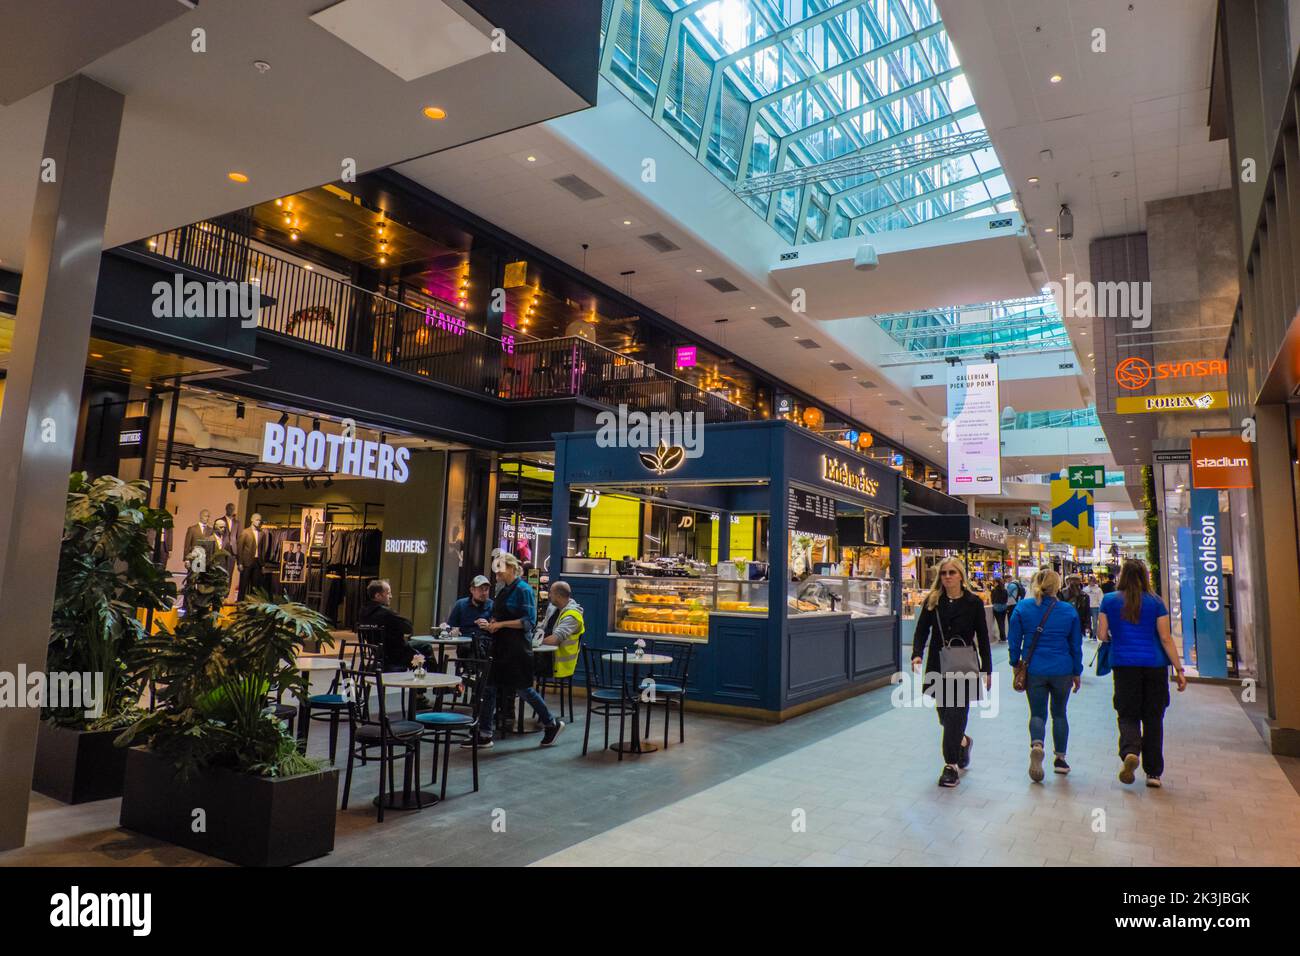 Gallerian, shopping mall, Norrmalm, Stockholm, Sweden Stock Photo